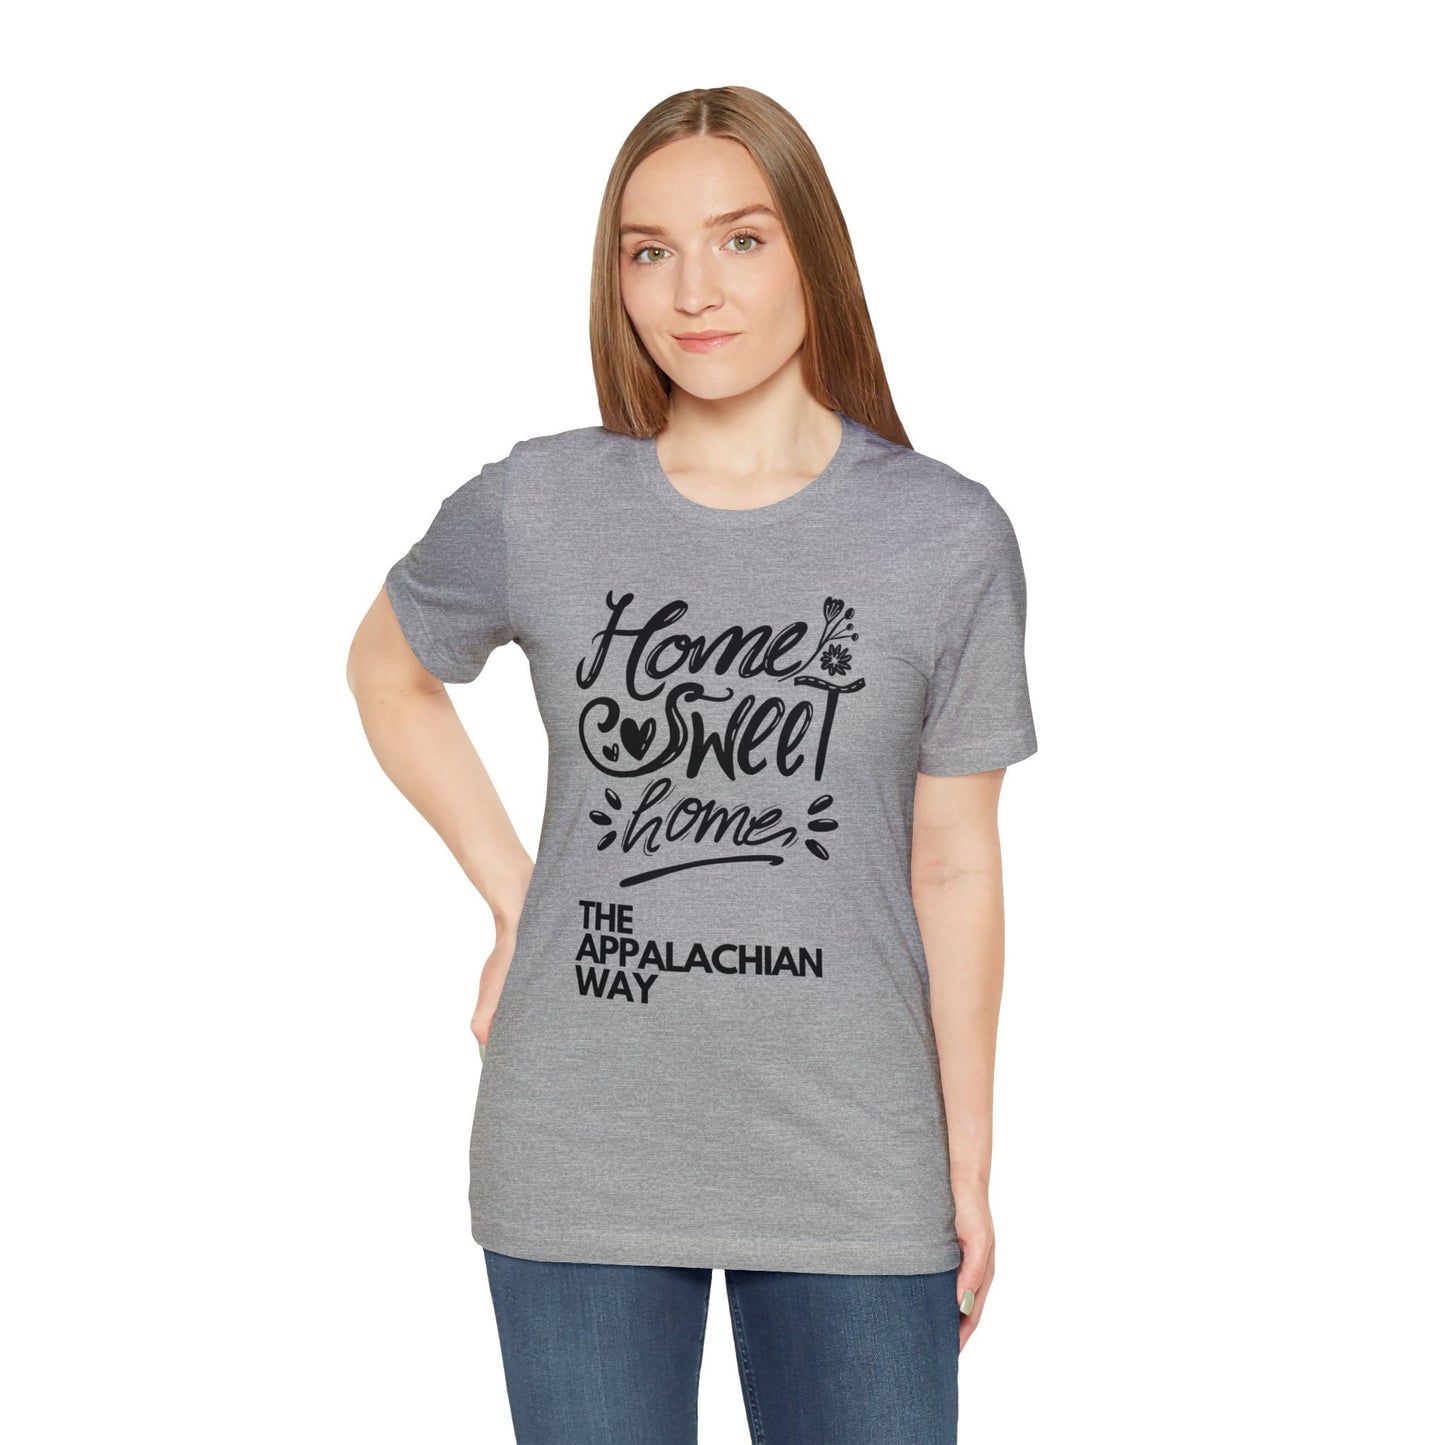 Home Sweet Home The Appalachian Way T-shirt | Love Your Home Tee, Inspirational Shirt, Country shirt, Ladies Fashion, gifts for her